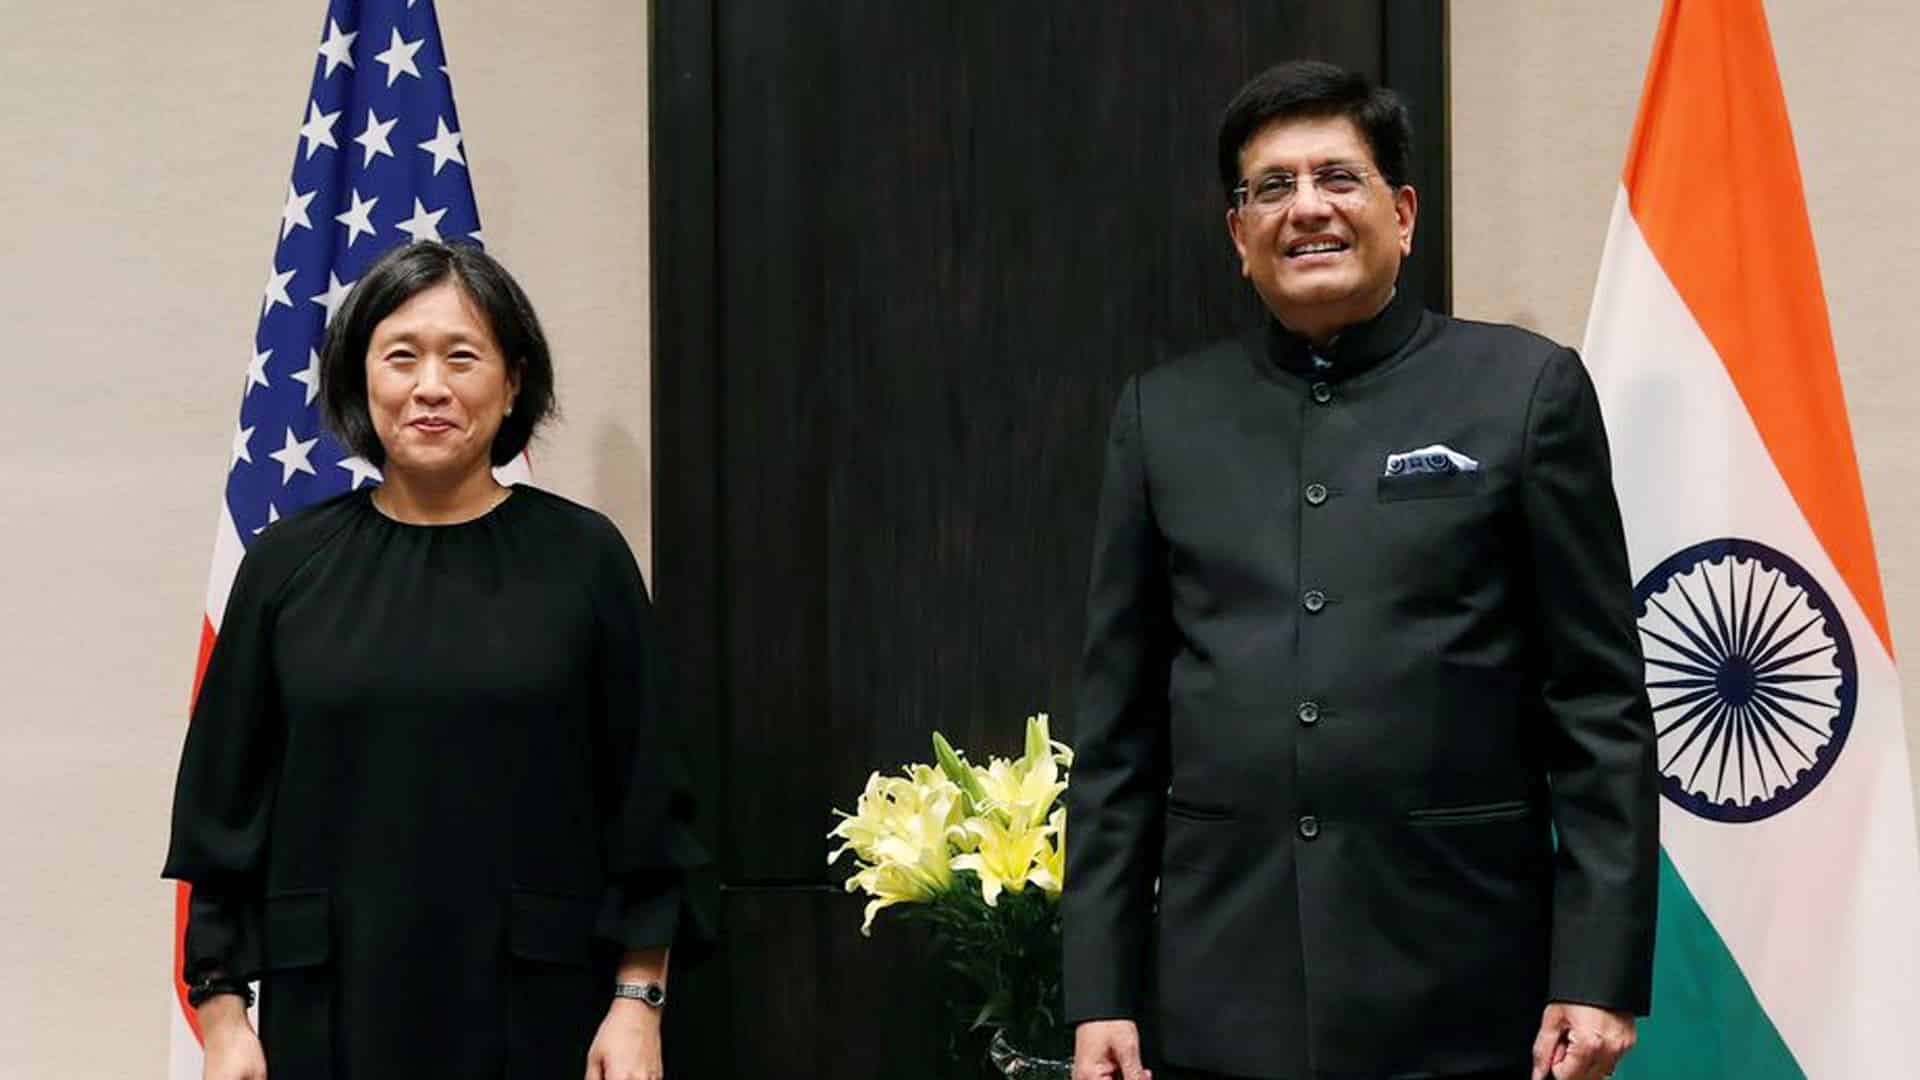 India-US Trade Policy Forum has key role in deepening understanding of each other's positions